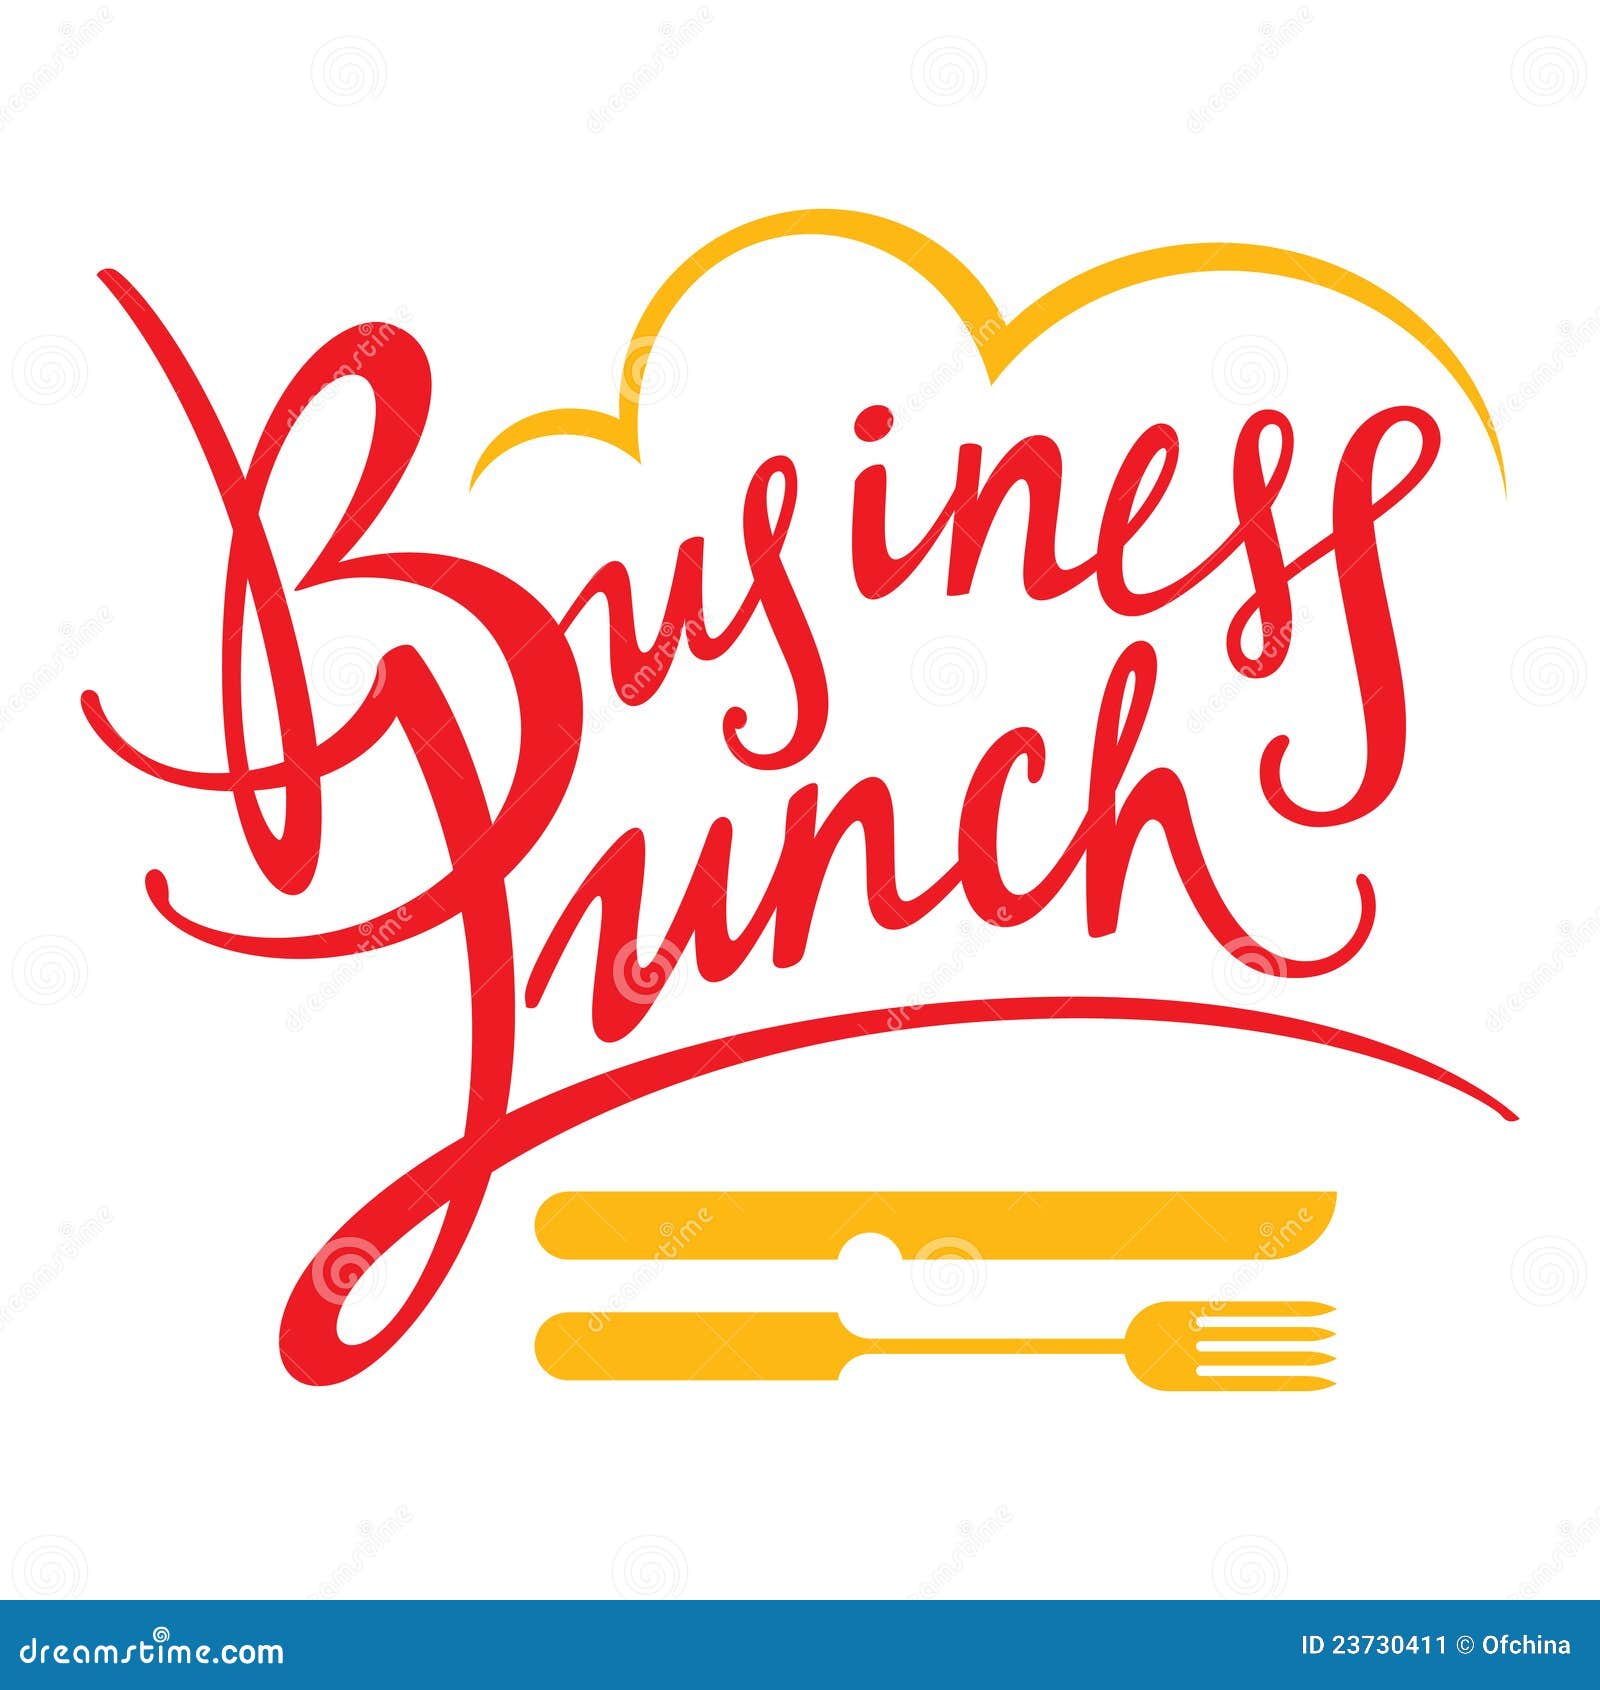 business lunch clipart - photo #2